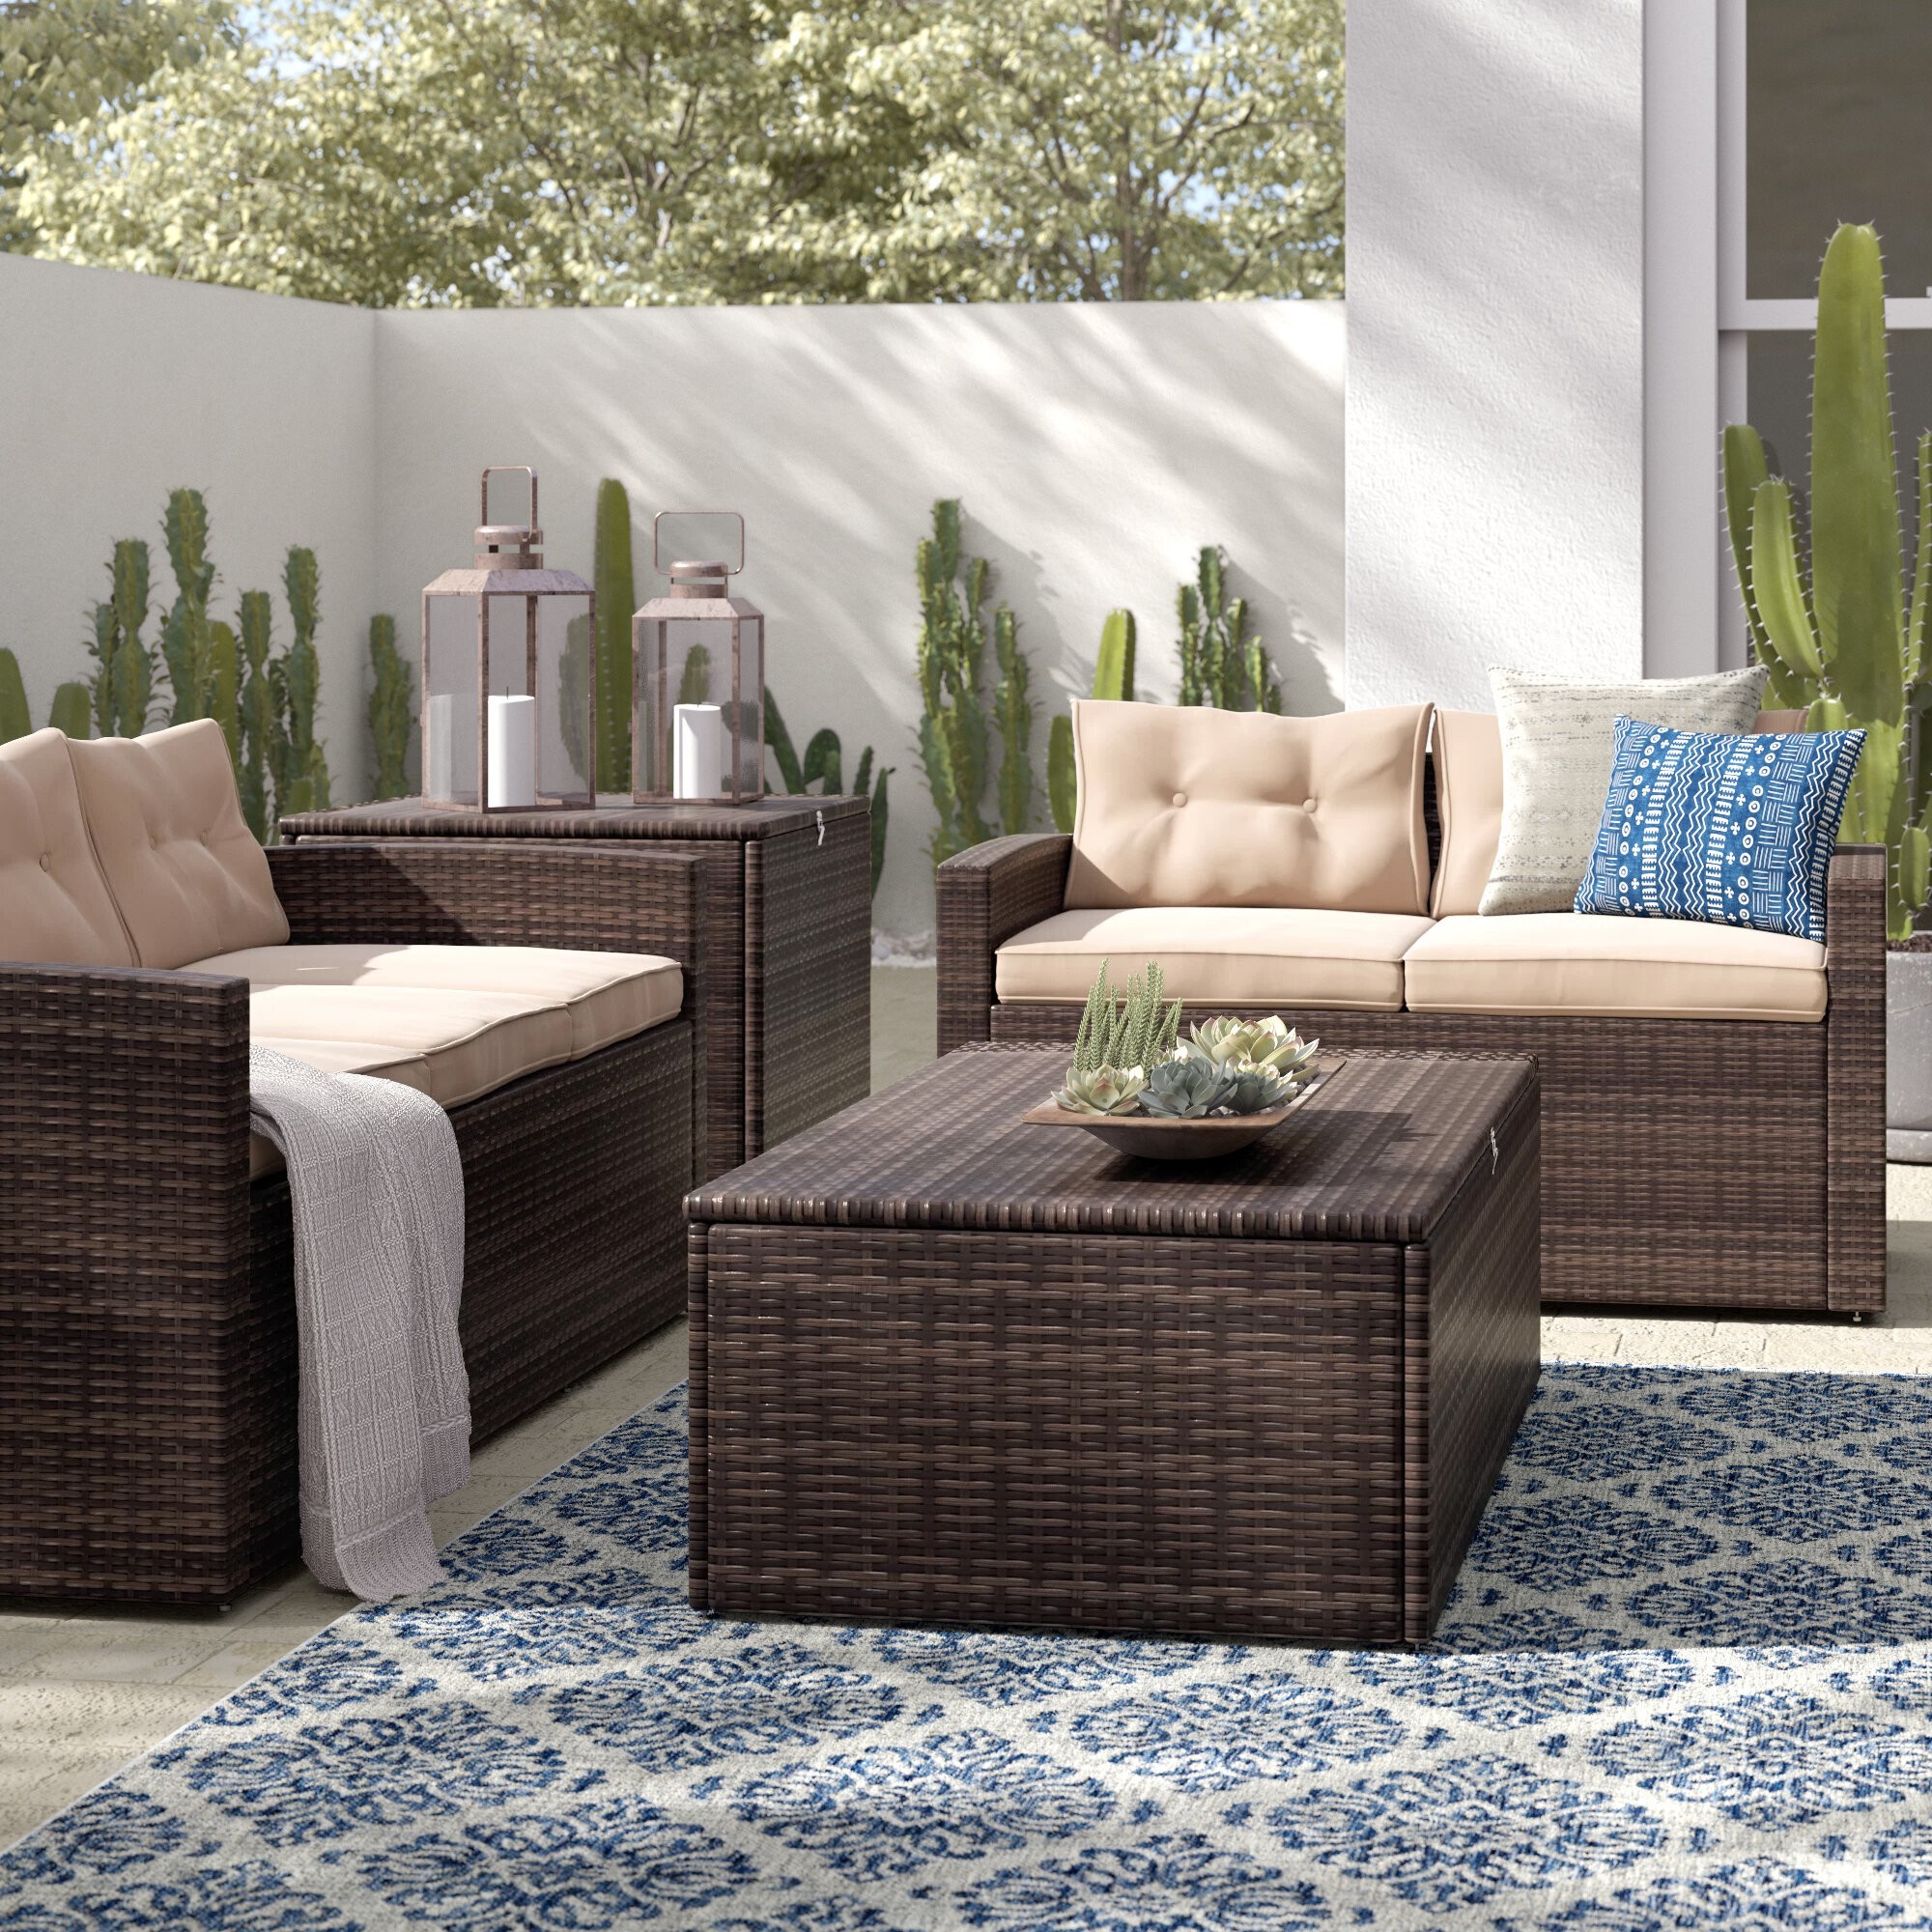 How To Choose A Patio Conversation Set Foter